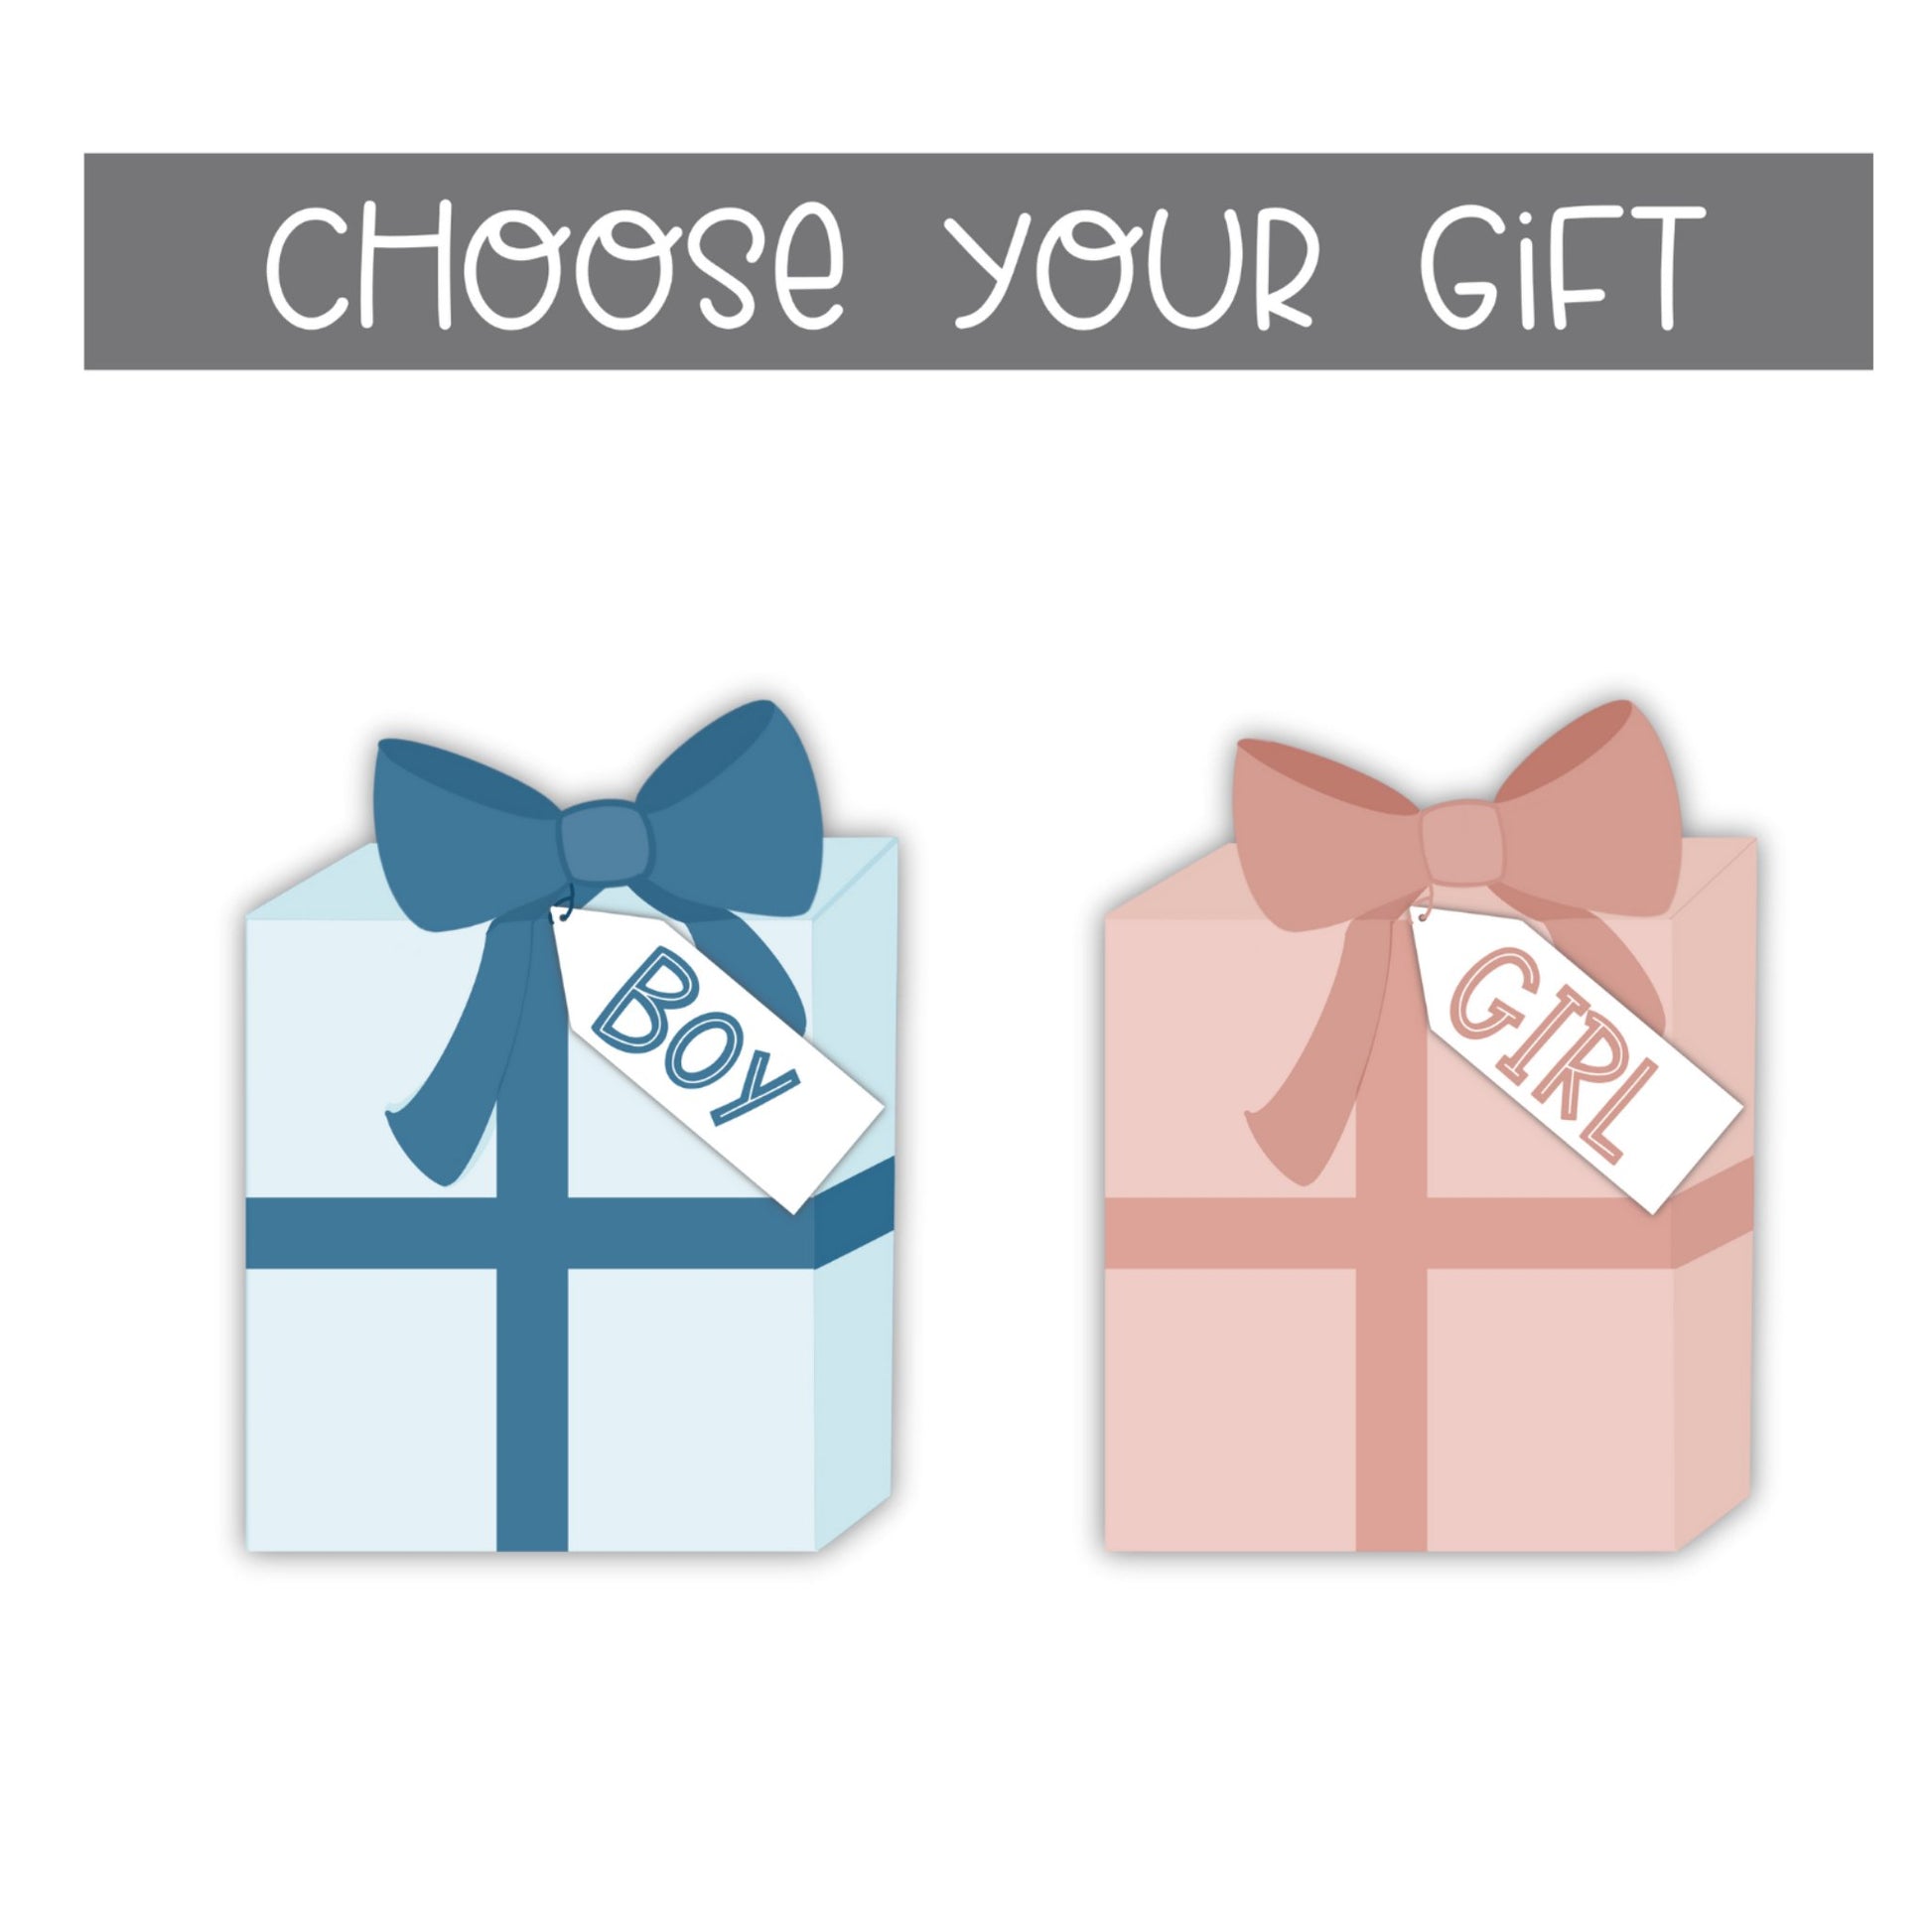 Choose your gift, the boy or girl gender version of the self-published personalized gift- a children’s picture book called “I’m Your Mommy”